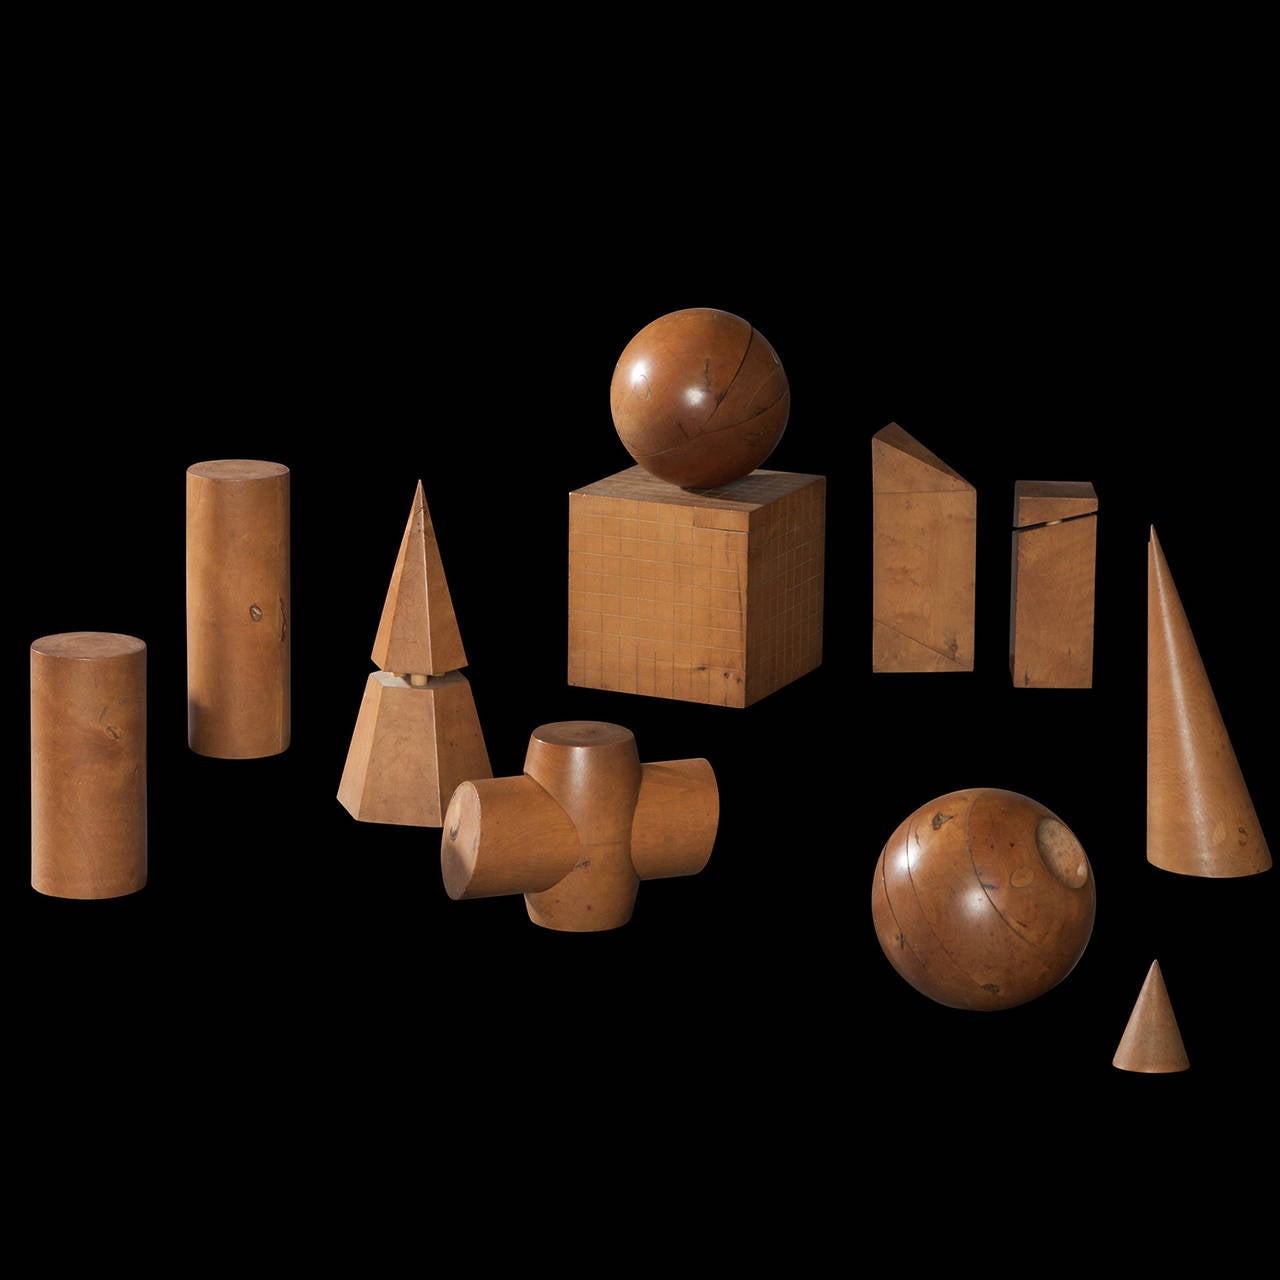 Unique set of (16) drawing forms intended for classroom use. Carved from Boxwood, featuring pegged construction, allowing the pieces to be disassembled.

Made in England circa 1900